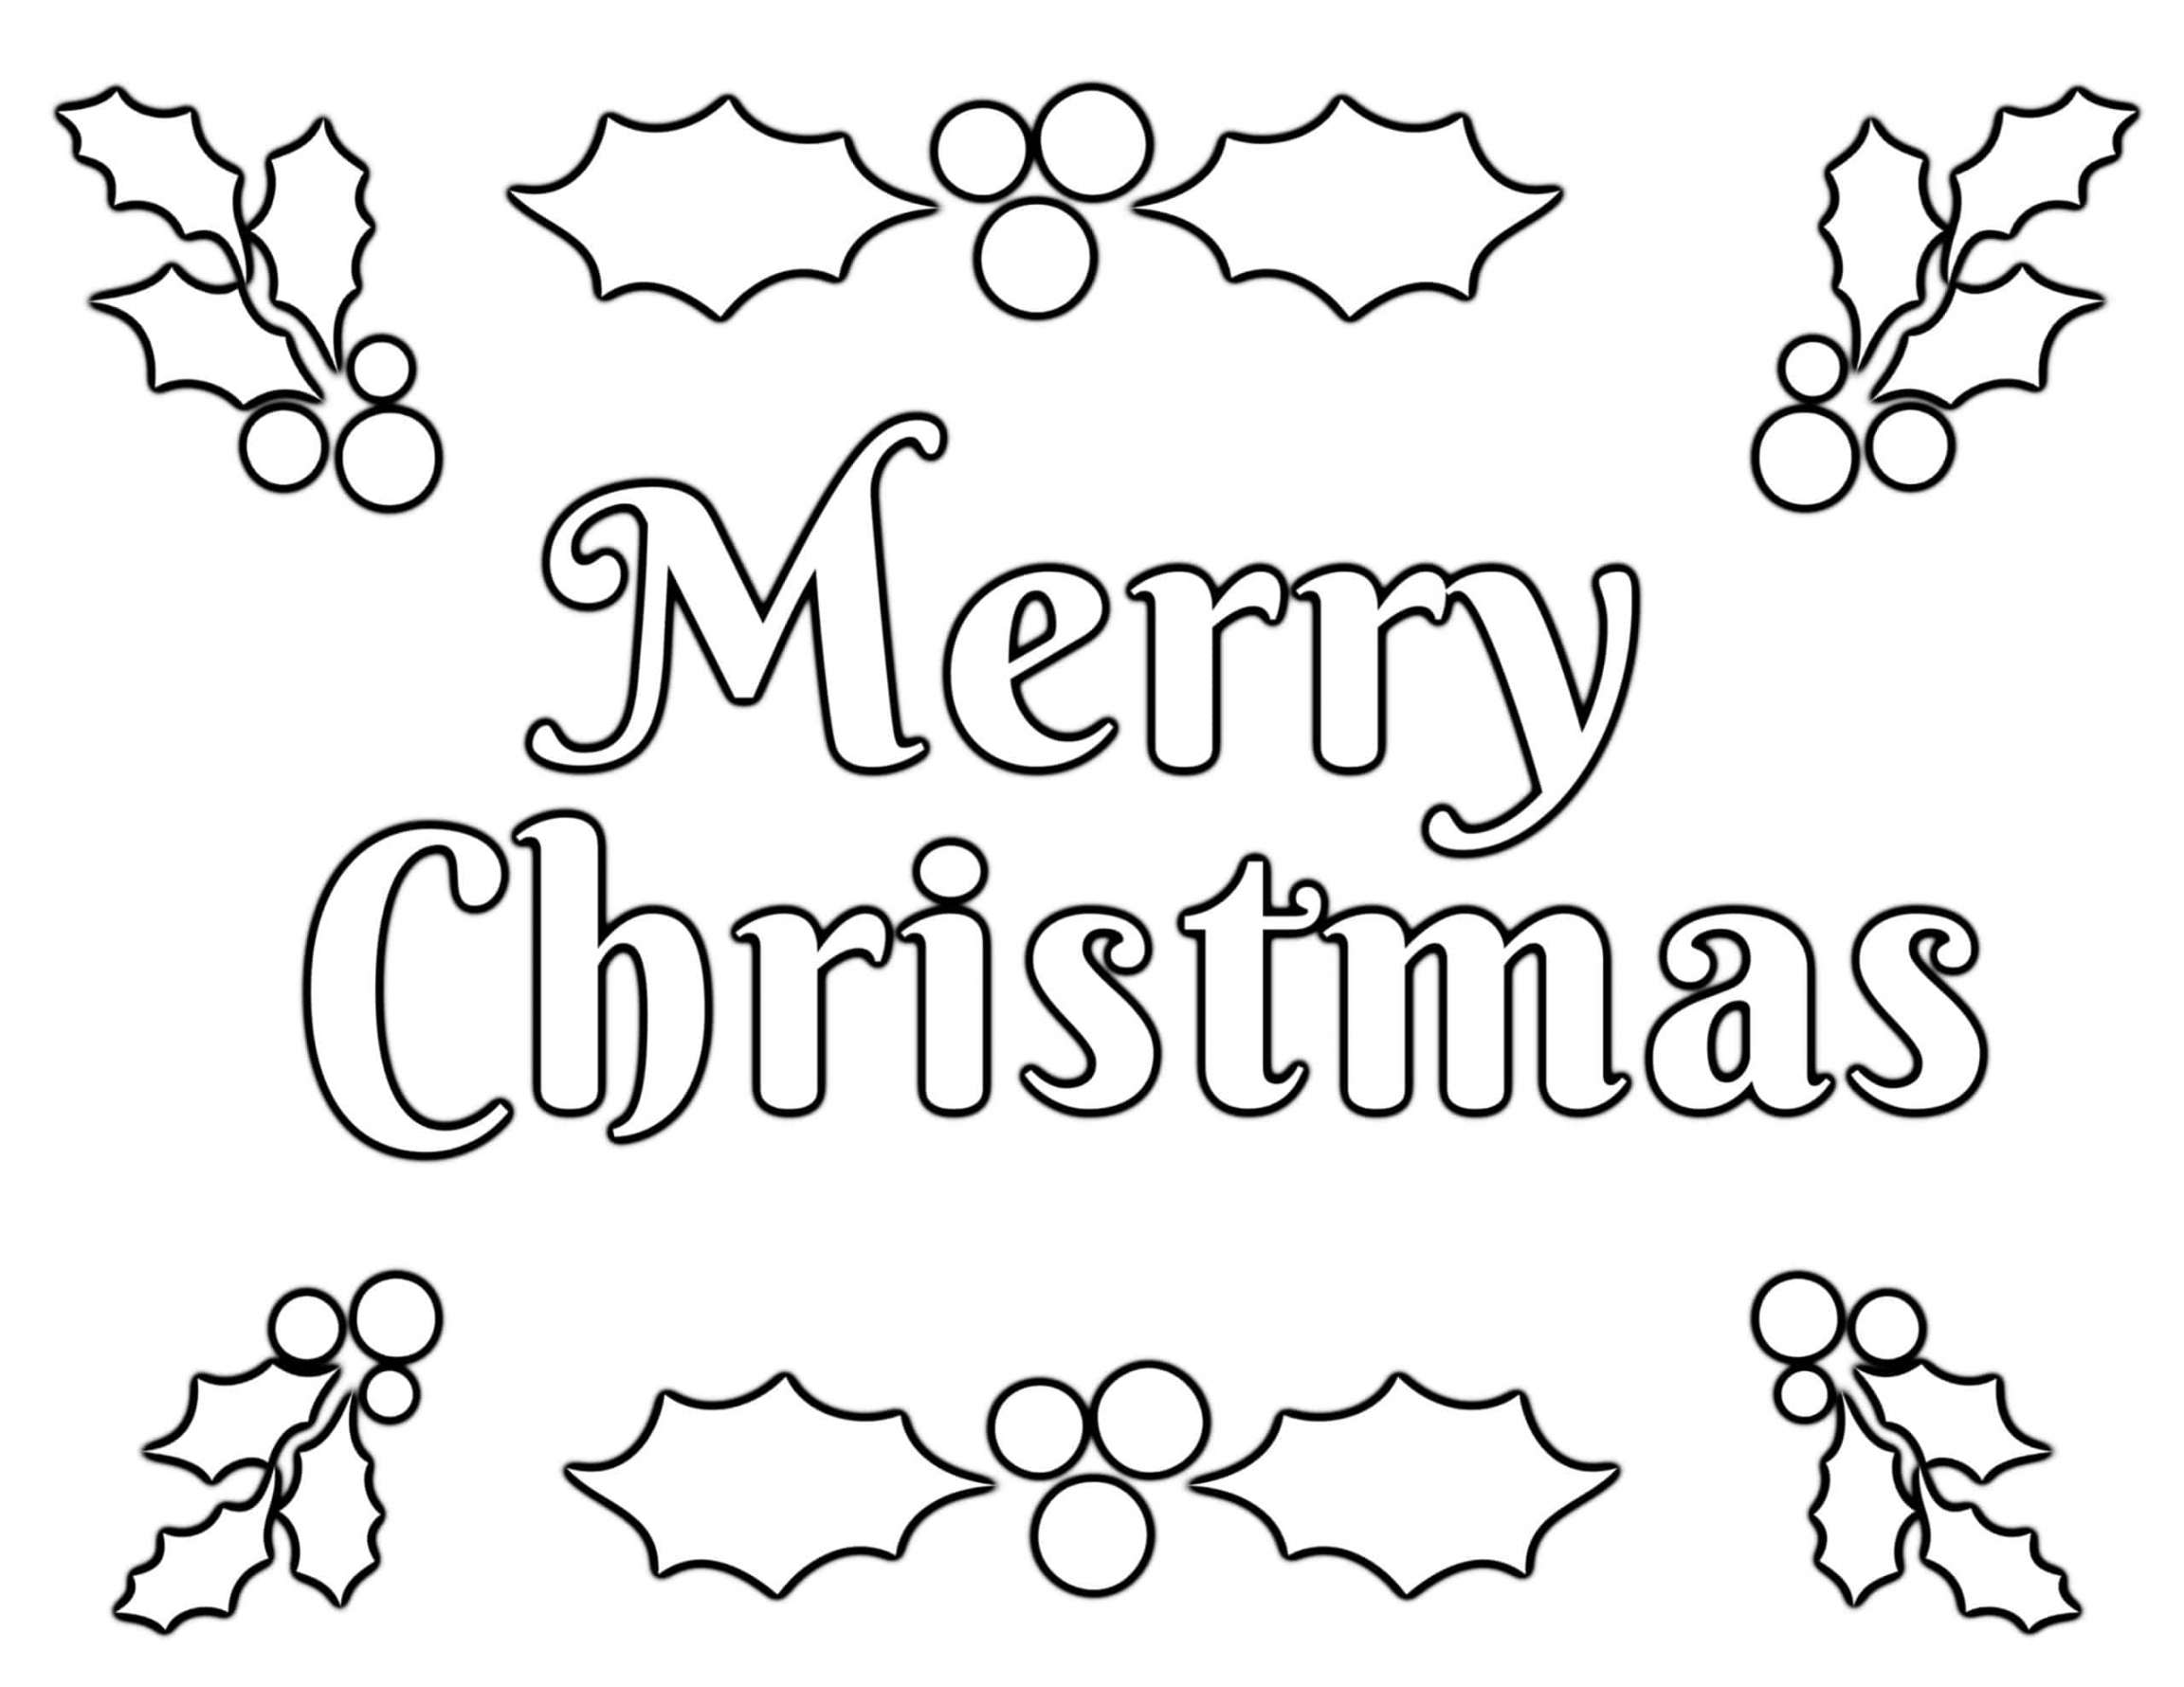 Free Christmas Coloring Pages Printable - Printable - Christmas Coloring Pages for Kids (% FREE) Easy Printable PDF